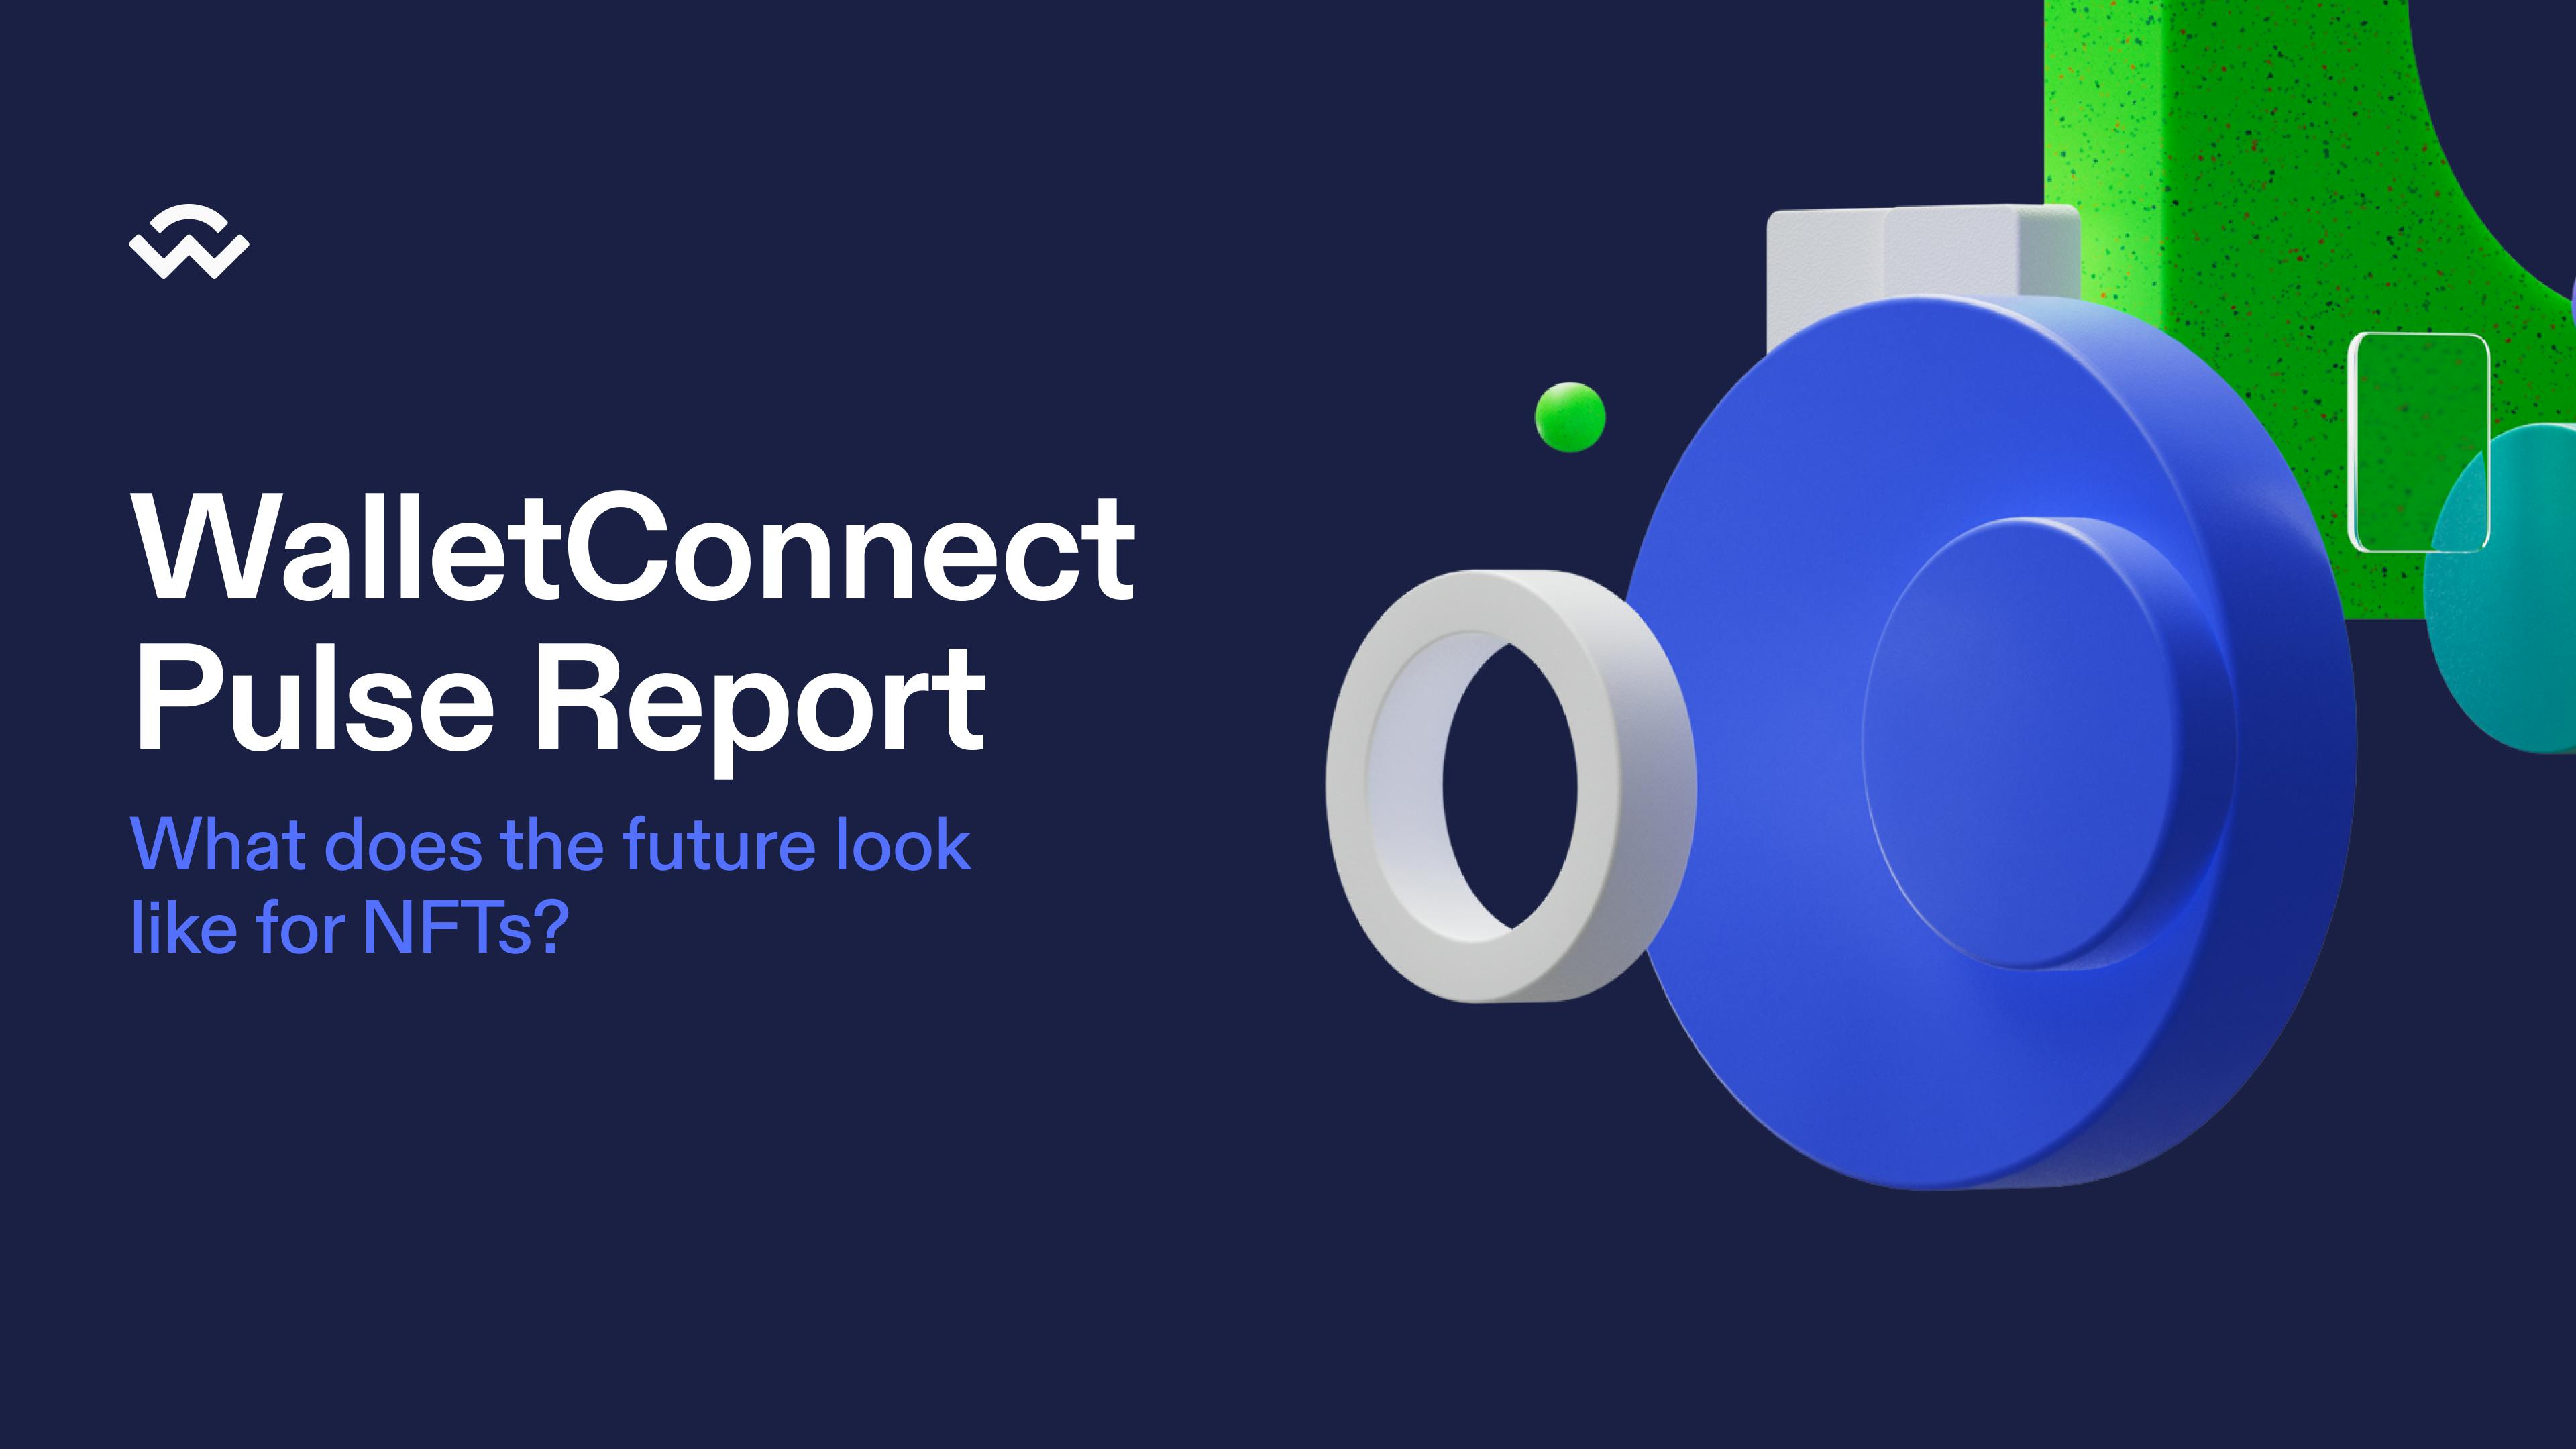 WalletConnect Pulse Report: What does the future look like for NFTs?